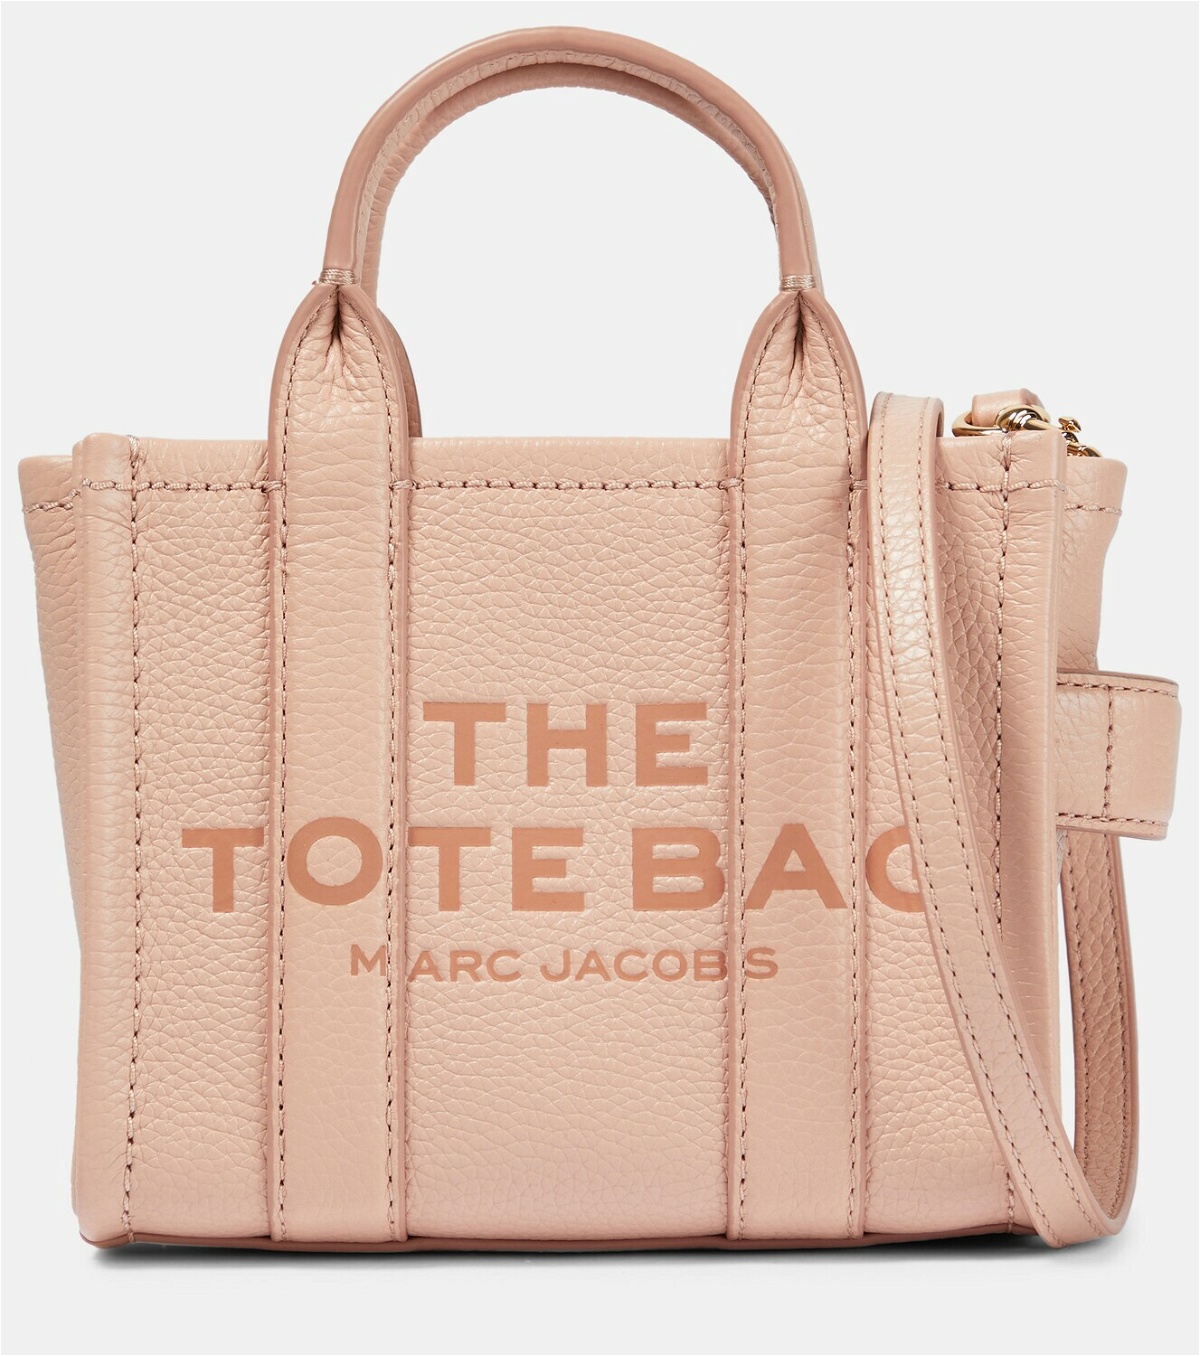 Marc Jacobs Tote Bags Cheapest Price - Womens Leather Micro Brown